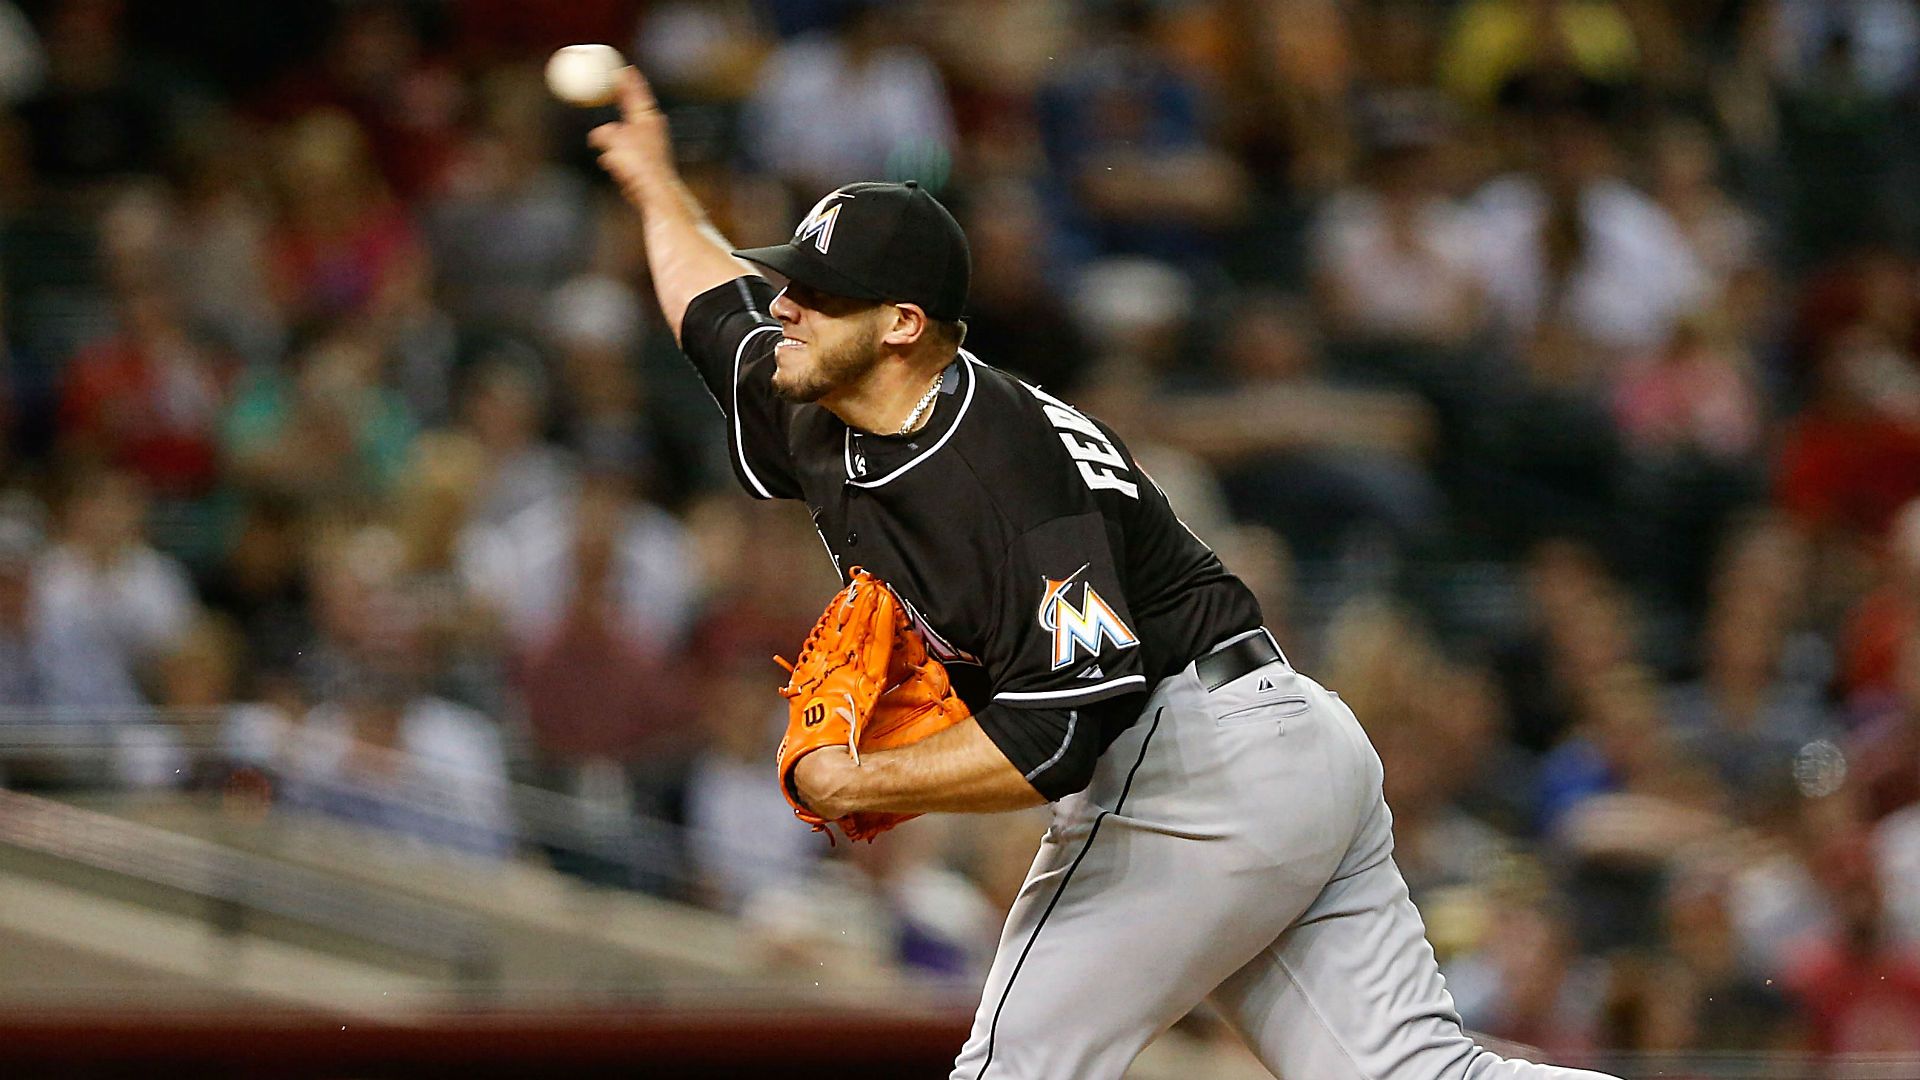 MLB highlights from Wednesday: Marlins ace Jose Fernandez got it done on the hill and at the plate; Joey Votto reaches base nine times